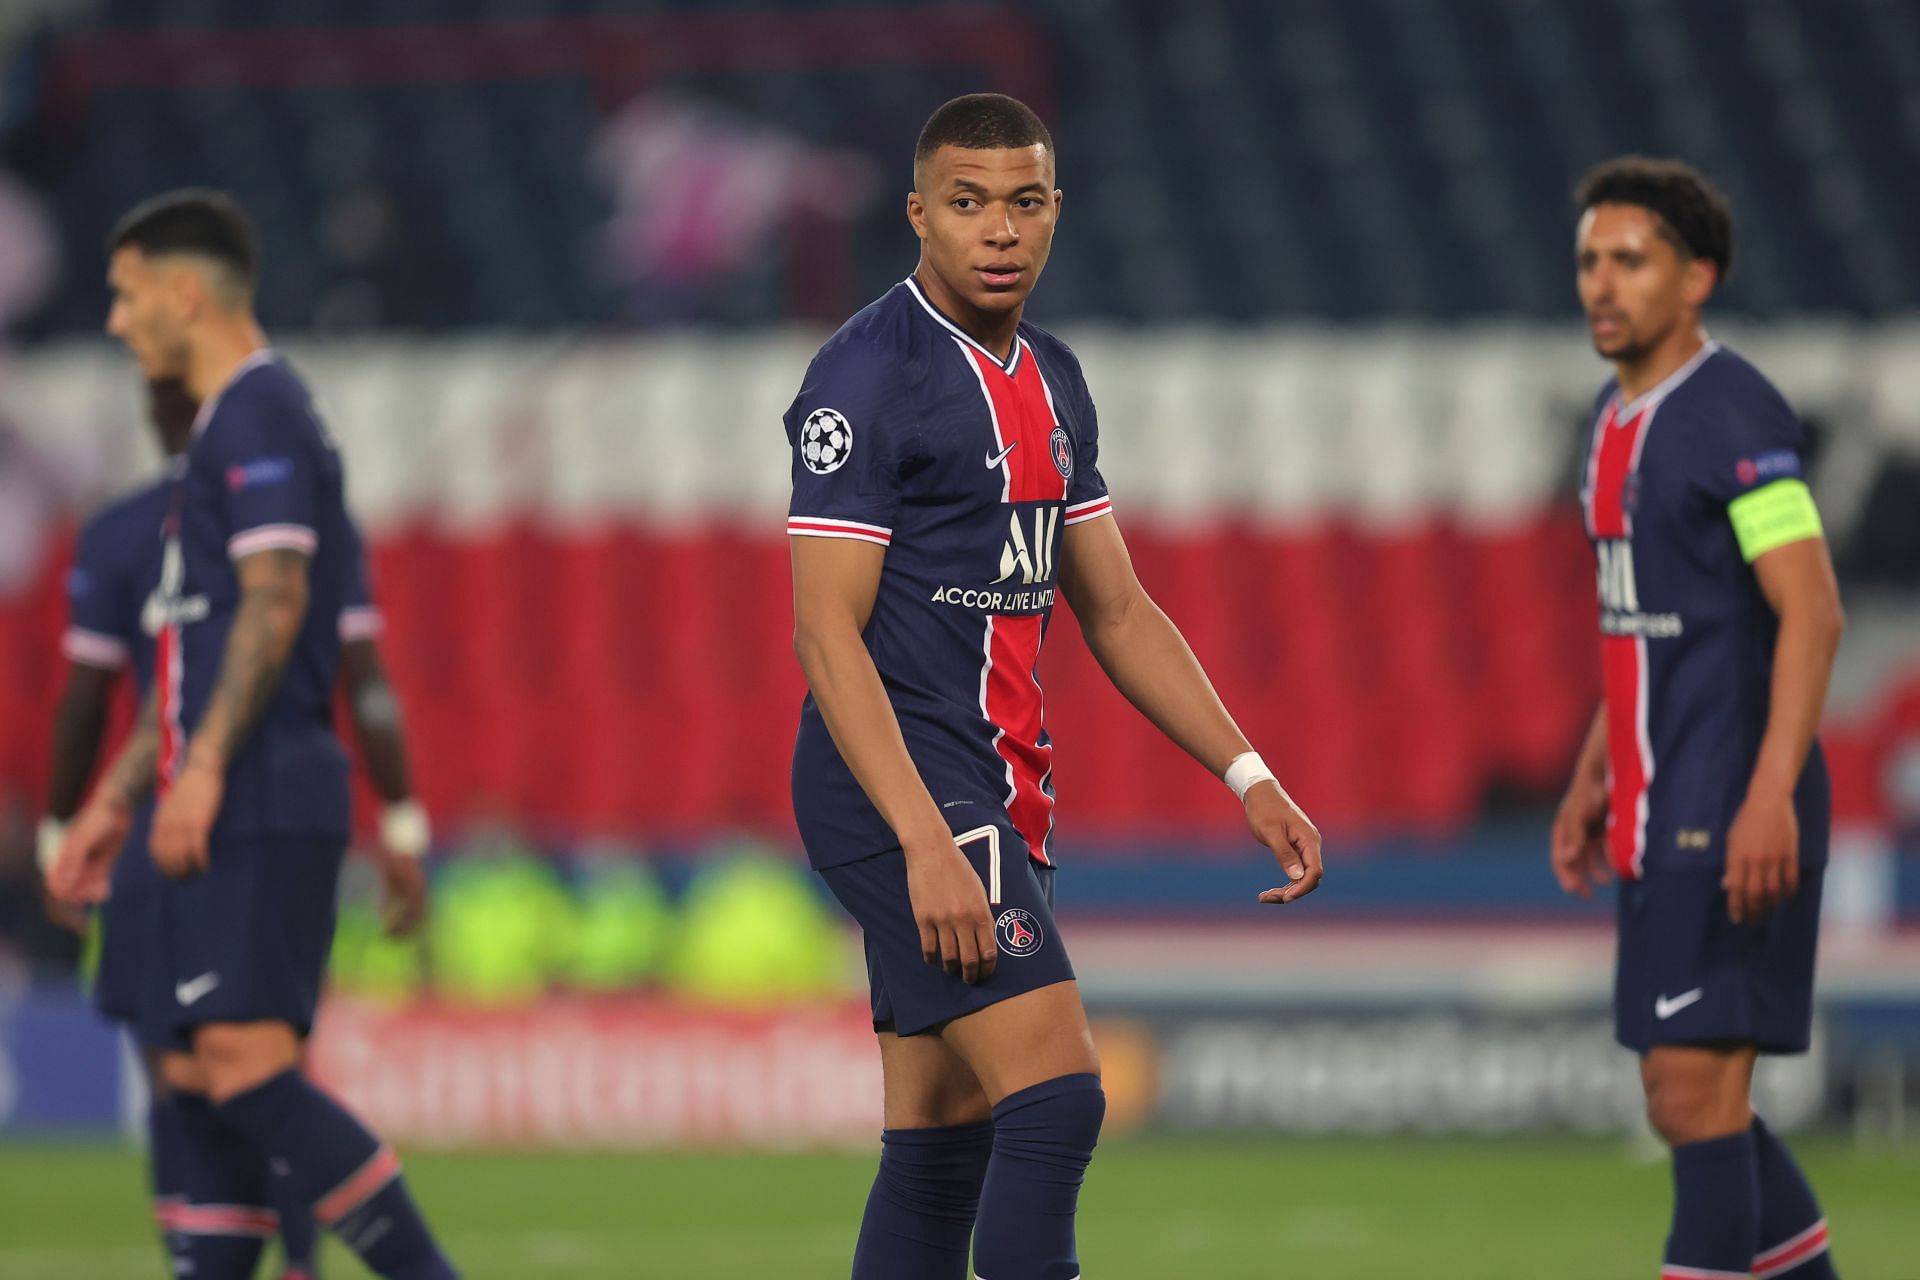 PSG take on Bordeaux in a Ligue 1 game this weekend